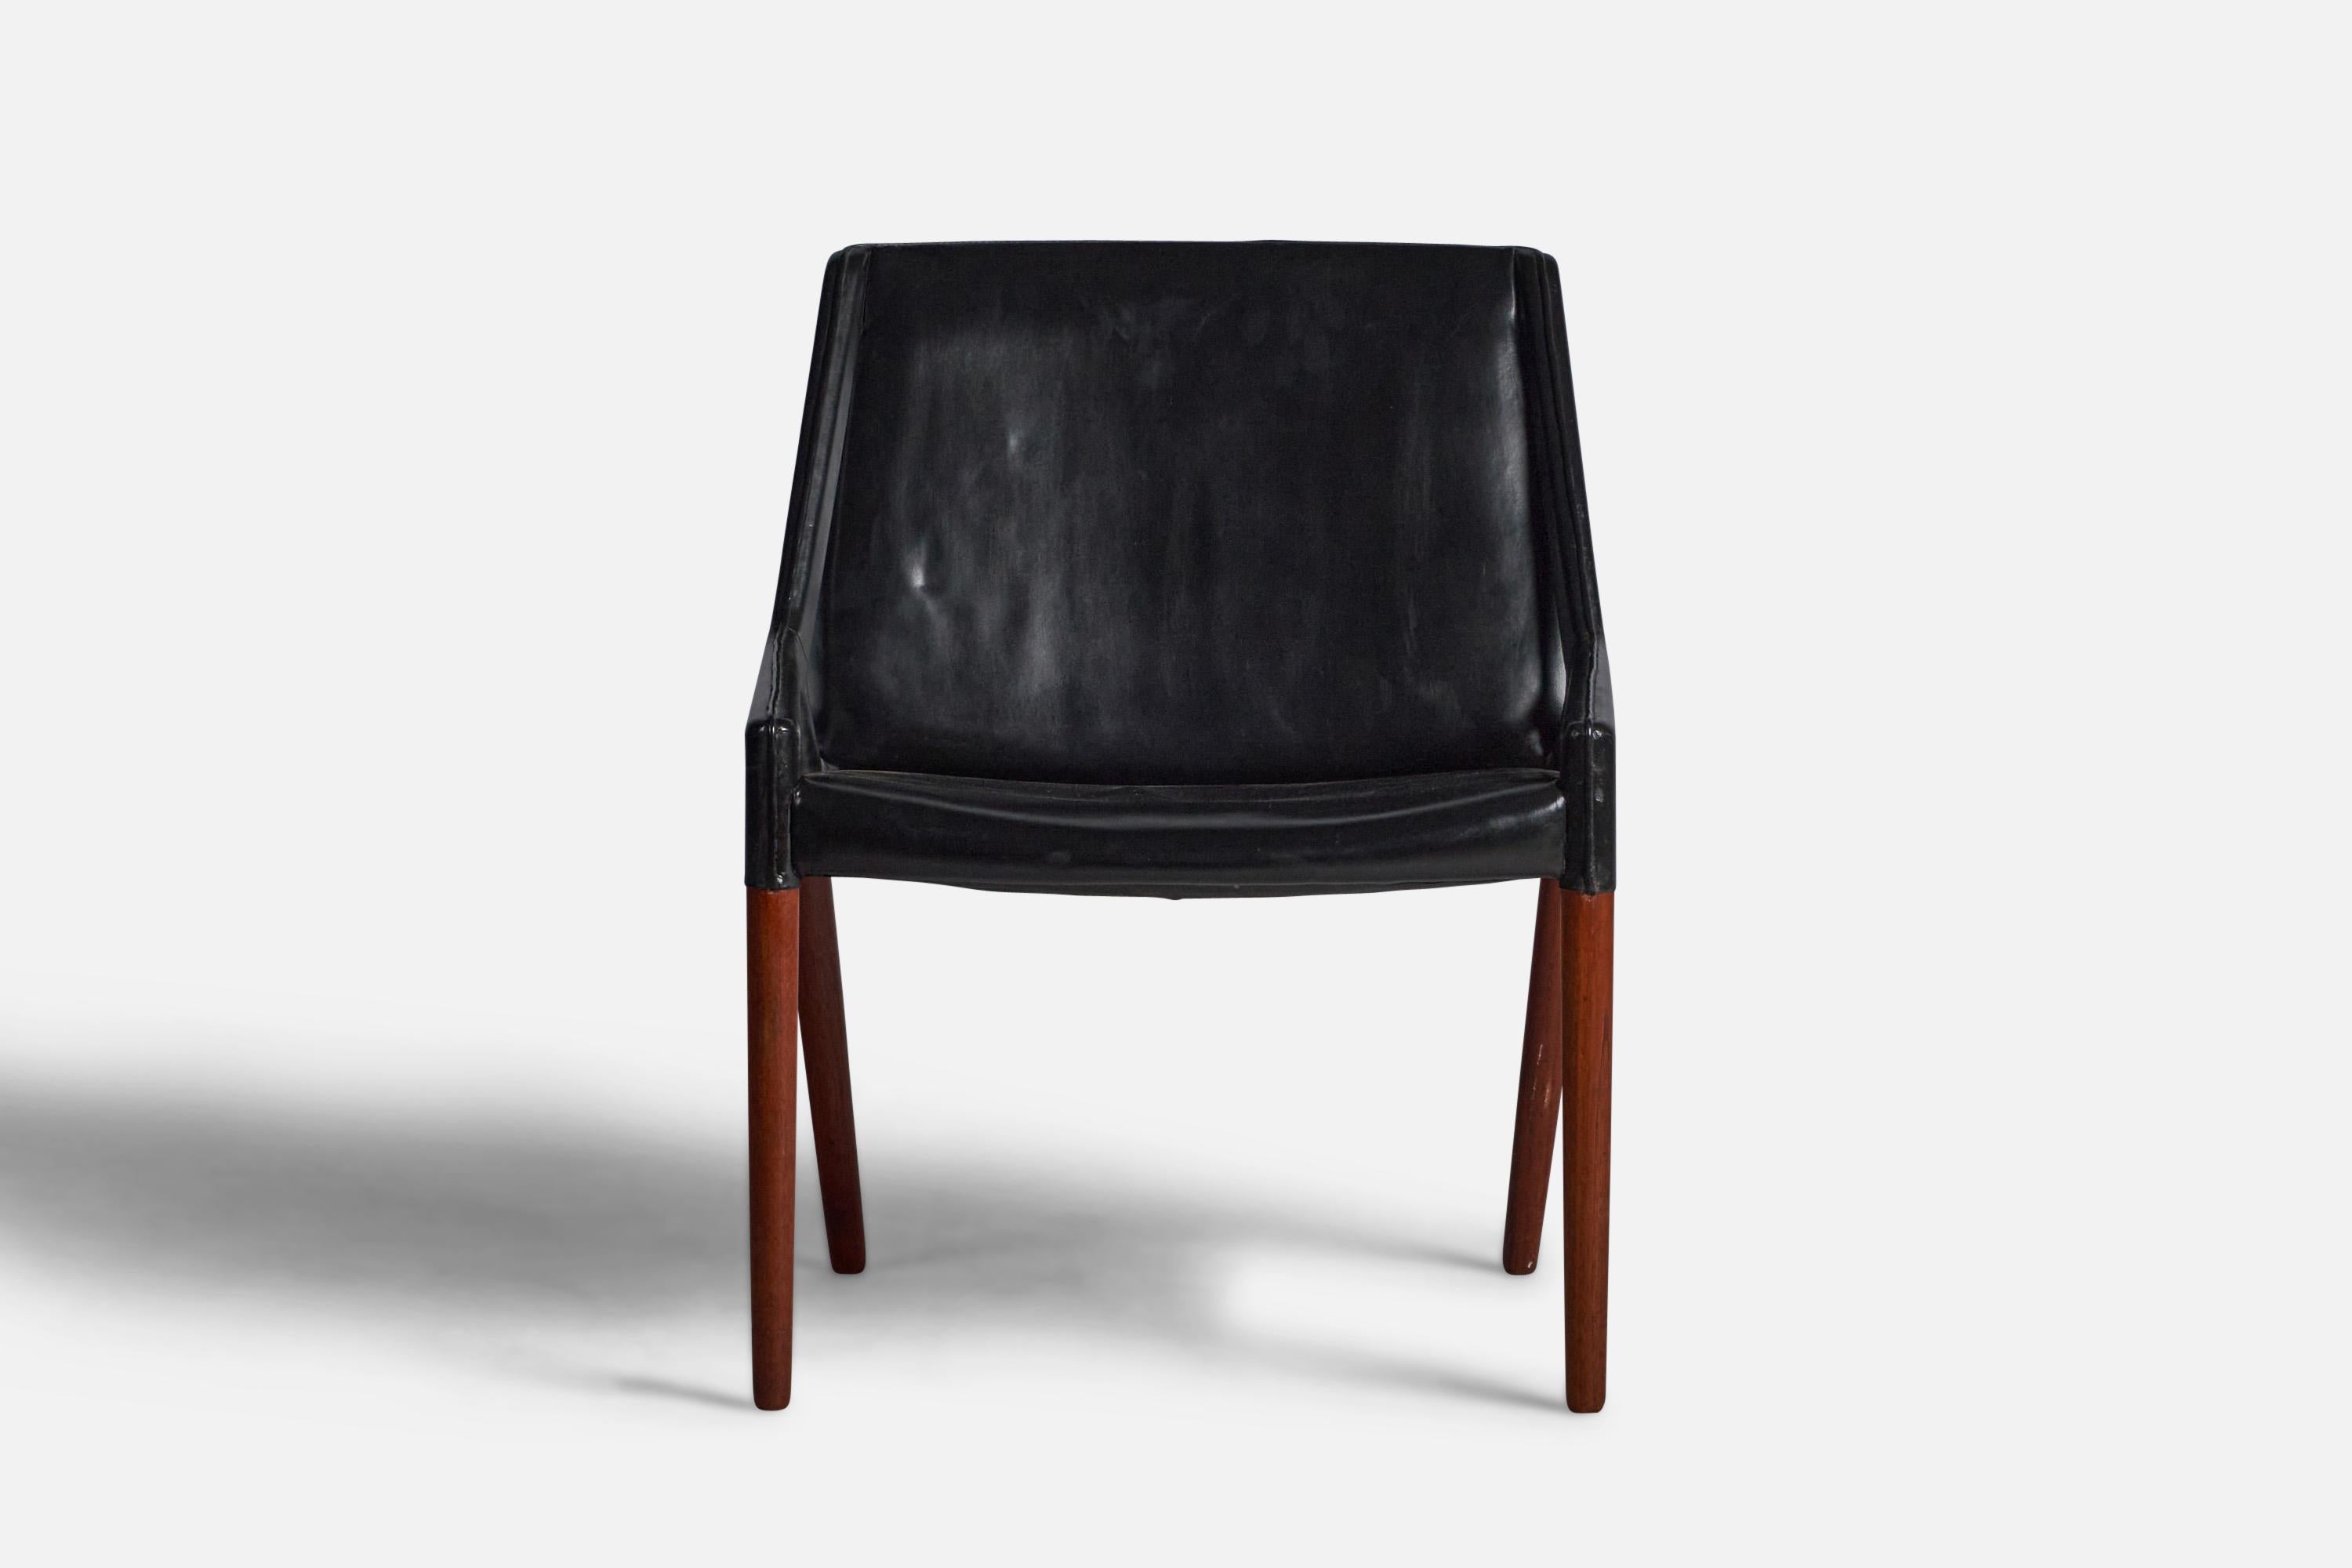 A rare lounge chair designed by Ejner Larsen & Axel Bender Madsen, in a very rare execution with black leather. A prime example of the designers collaboration with the renowned cabinet maker Willy Beck, Copenhagen, Denmark. Bears manufacturers metal